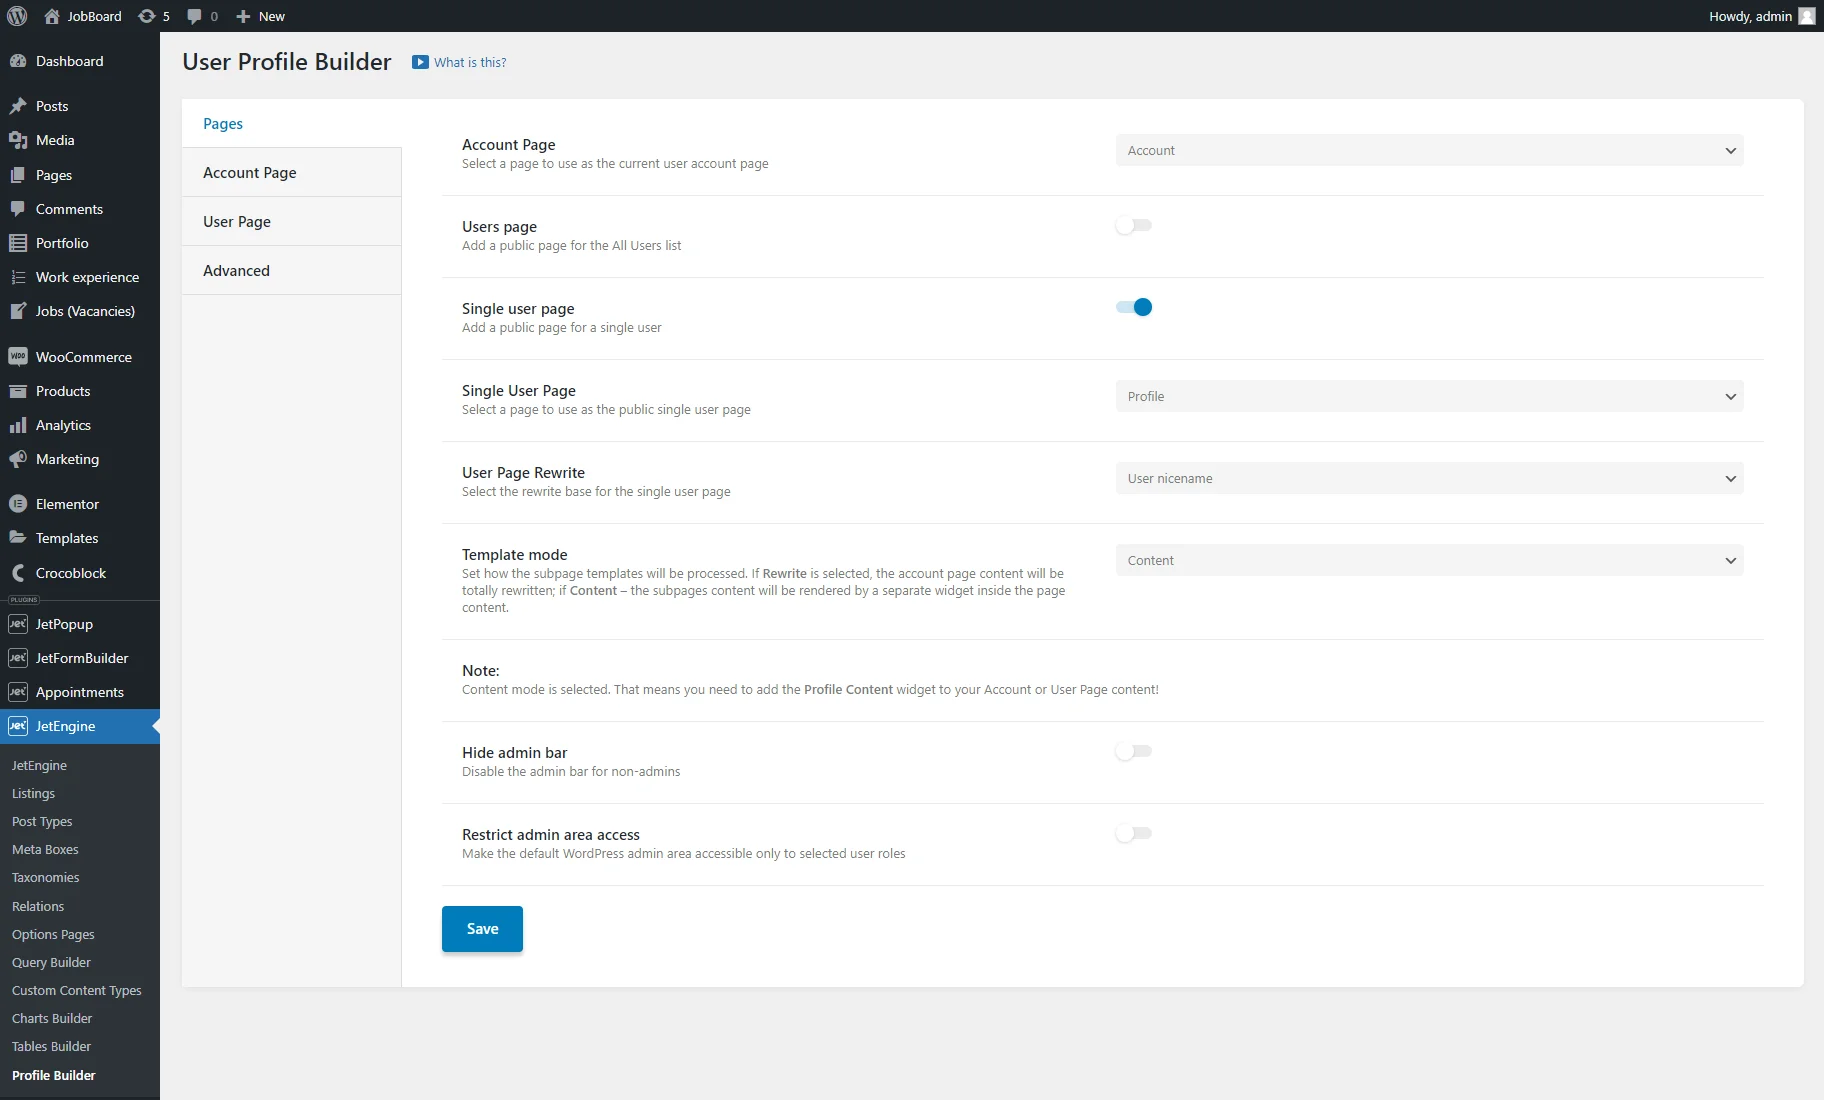 single user page set in the profile builder dashboard